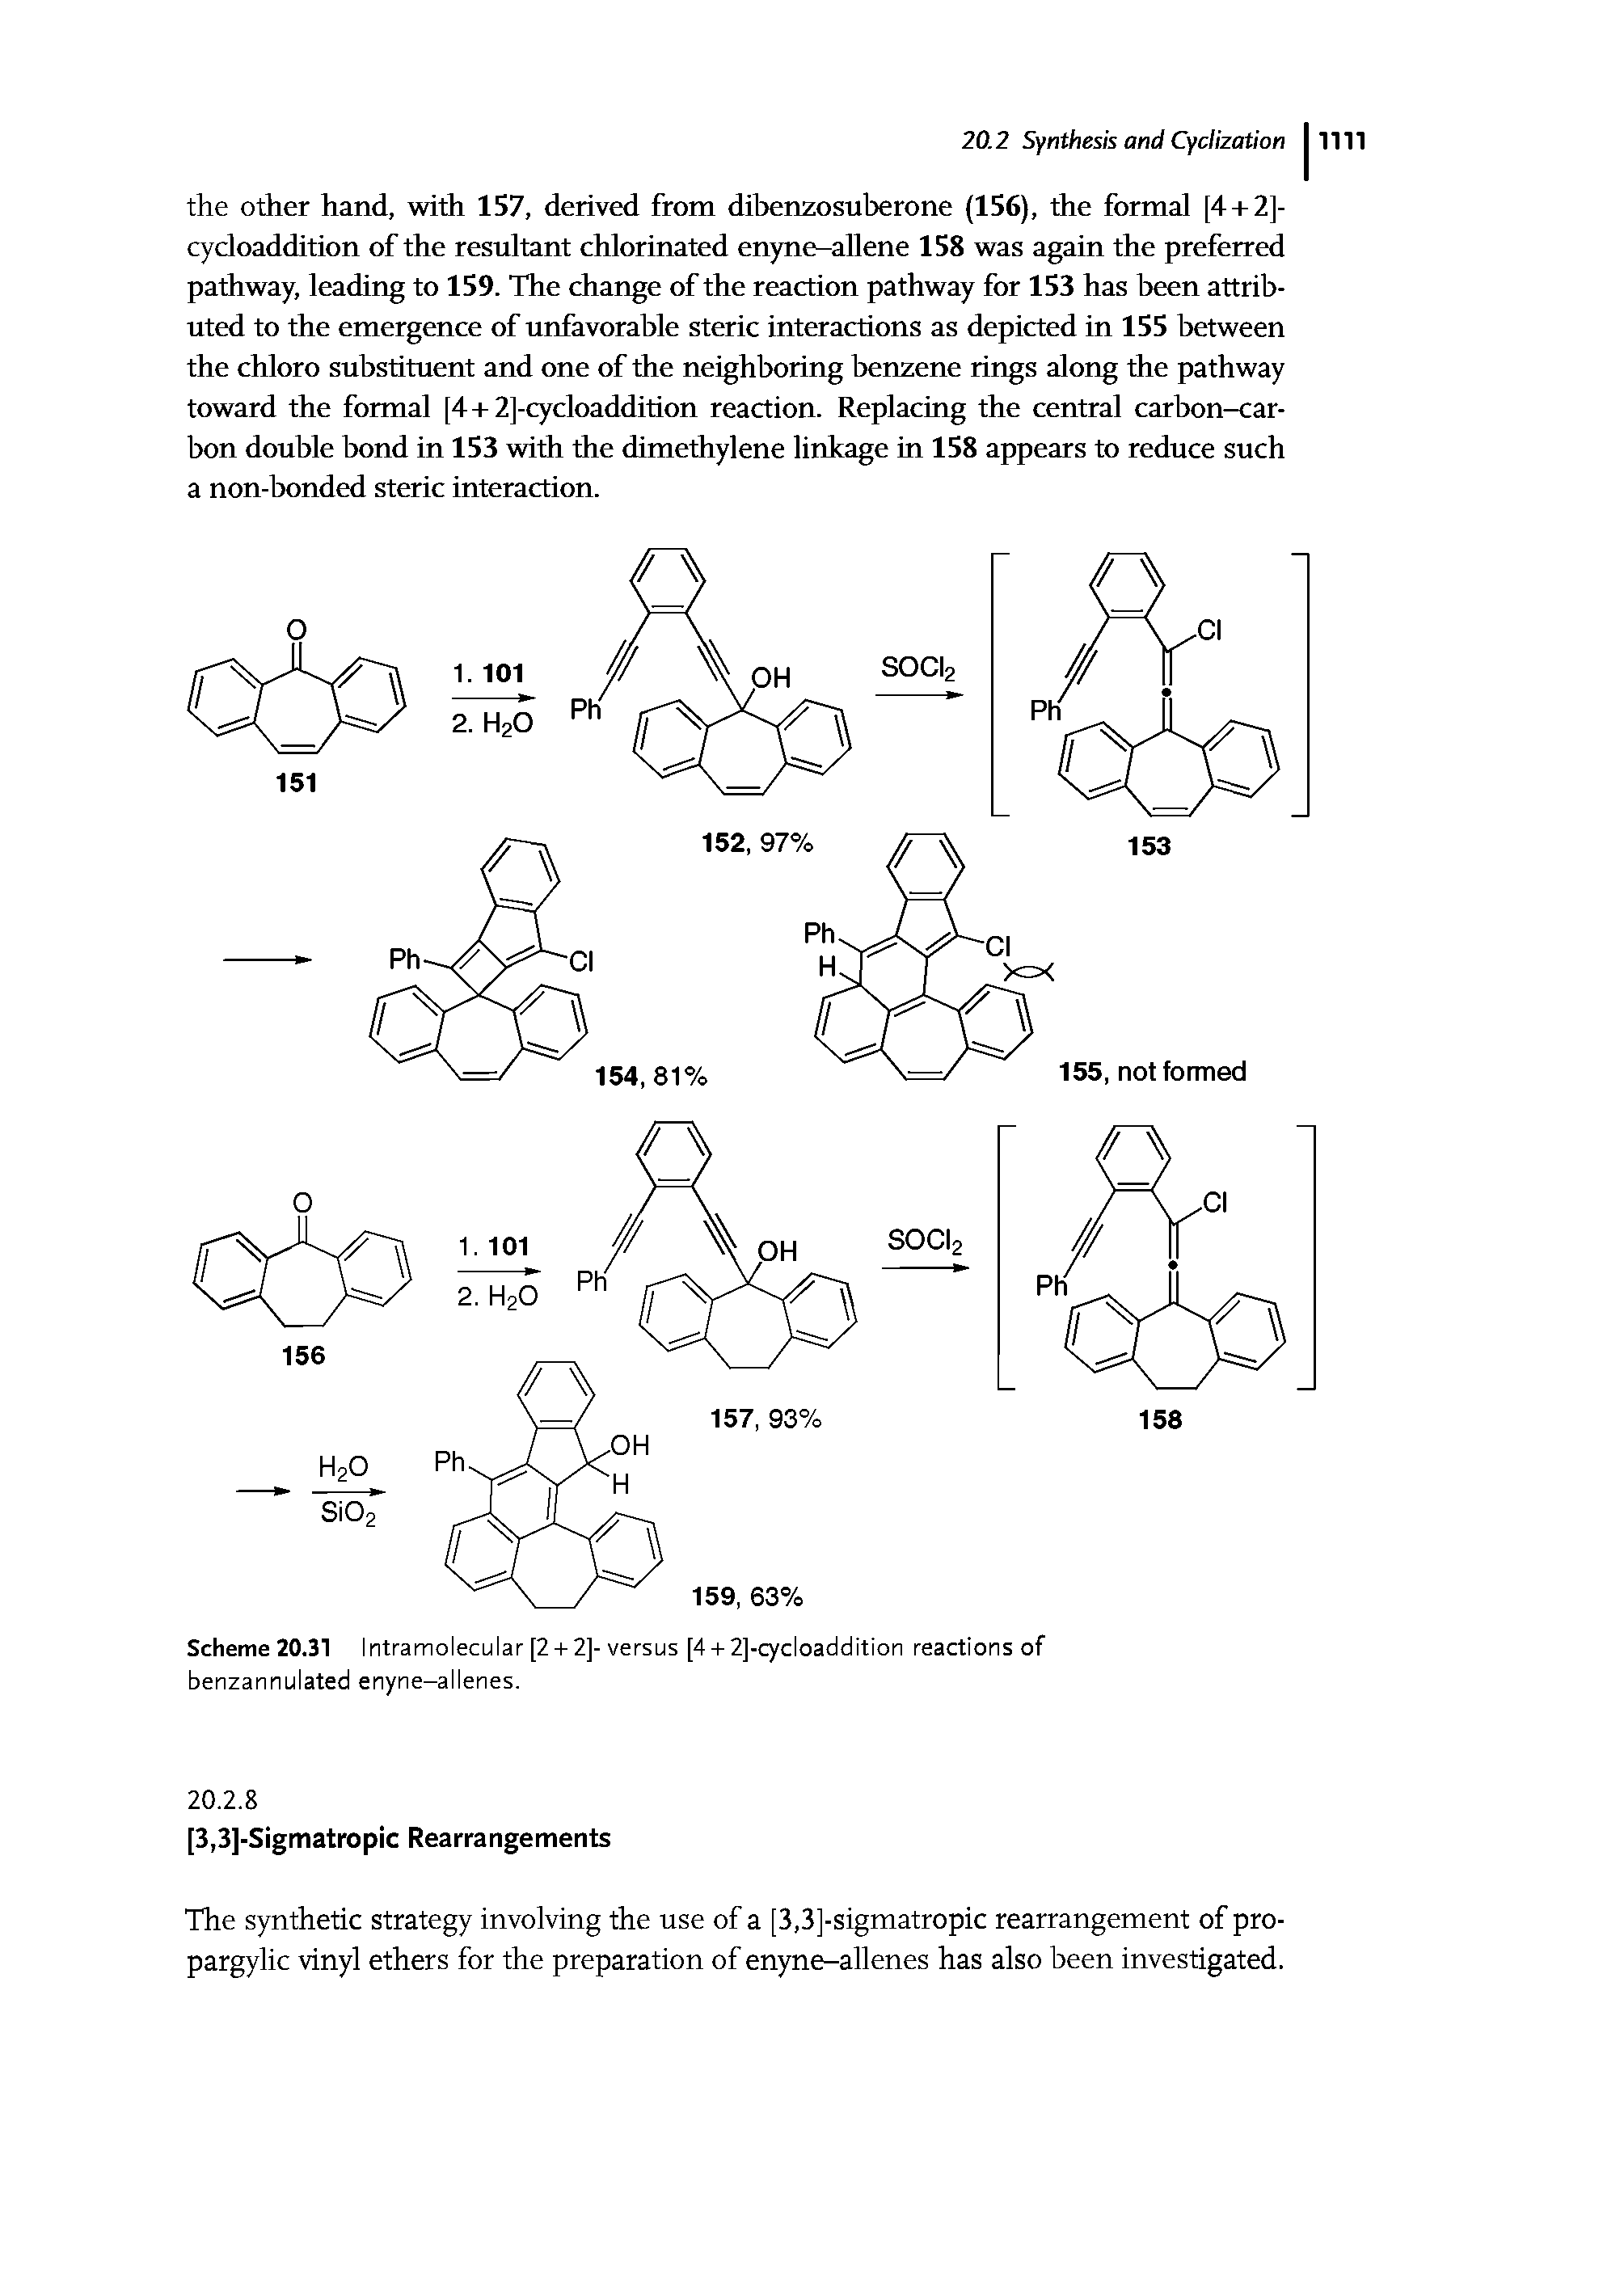 Scheme 20.31 Intramolecular [2 + 2]-versus [4 + 2]-cycloaddition reactions of benzannulated enyne-allenes.